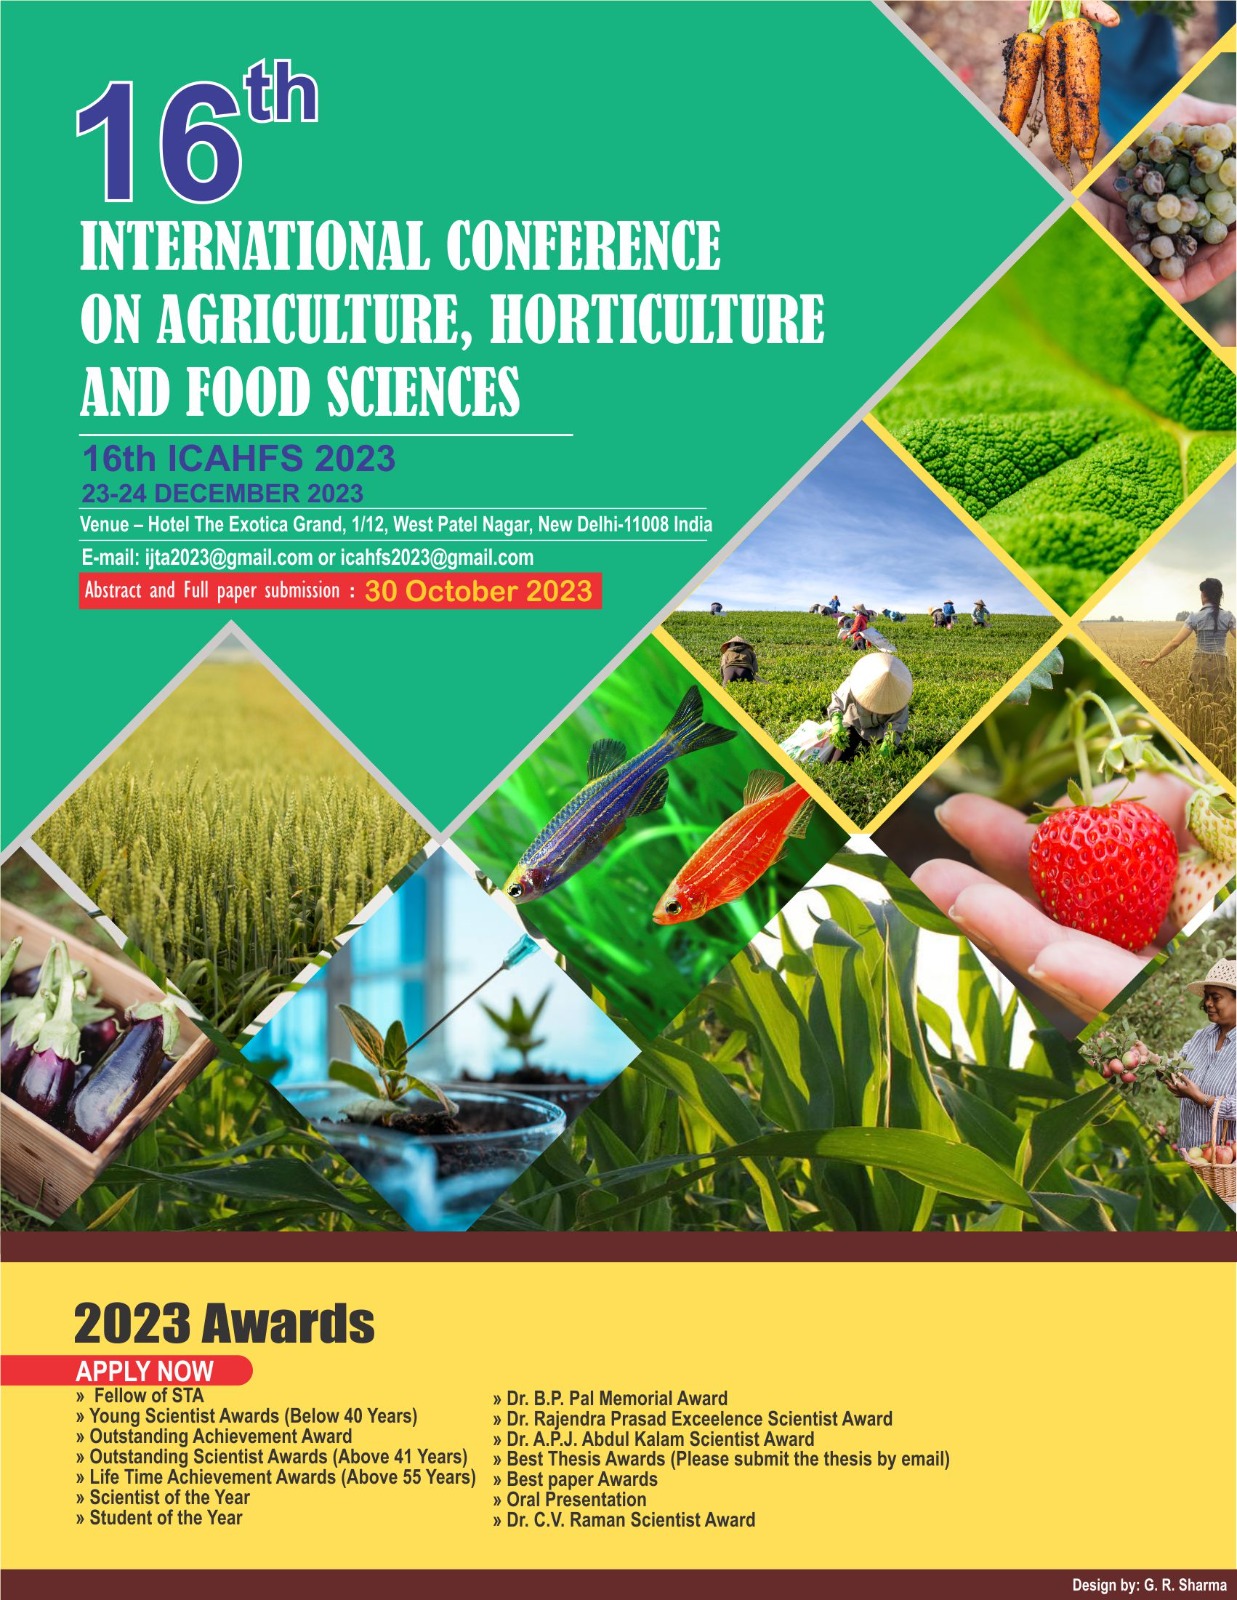 16th INTERNATİONAL CONFERENCE ON AGRICULTURE, HORTICULTURE AND FOOD SCIENCES